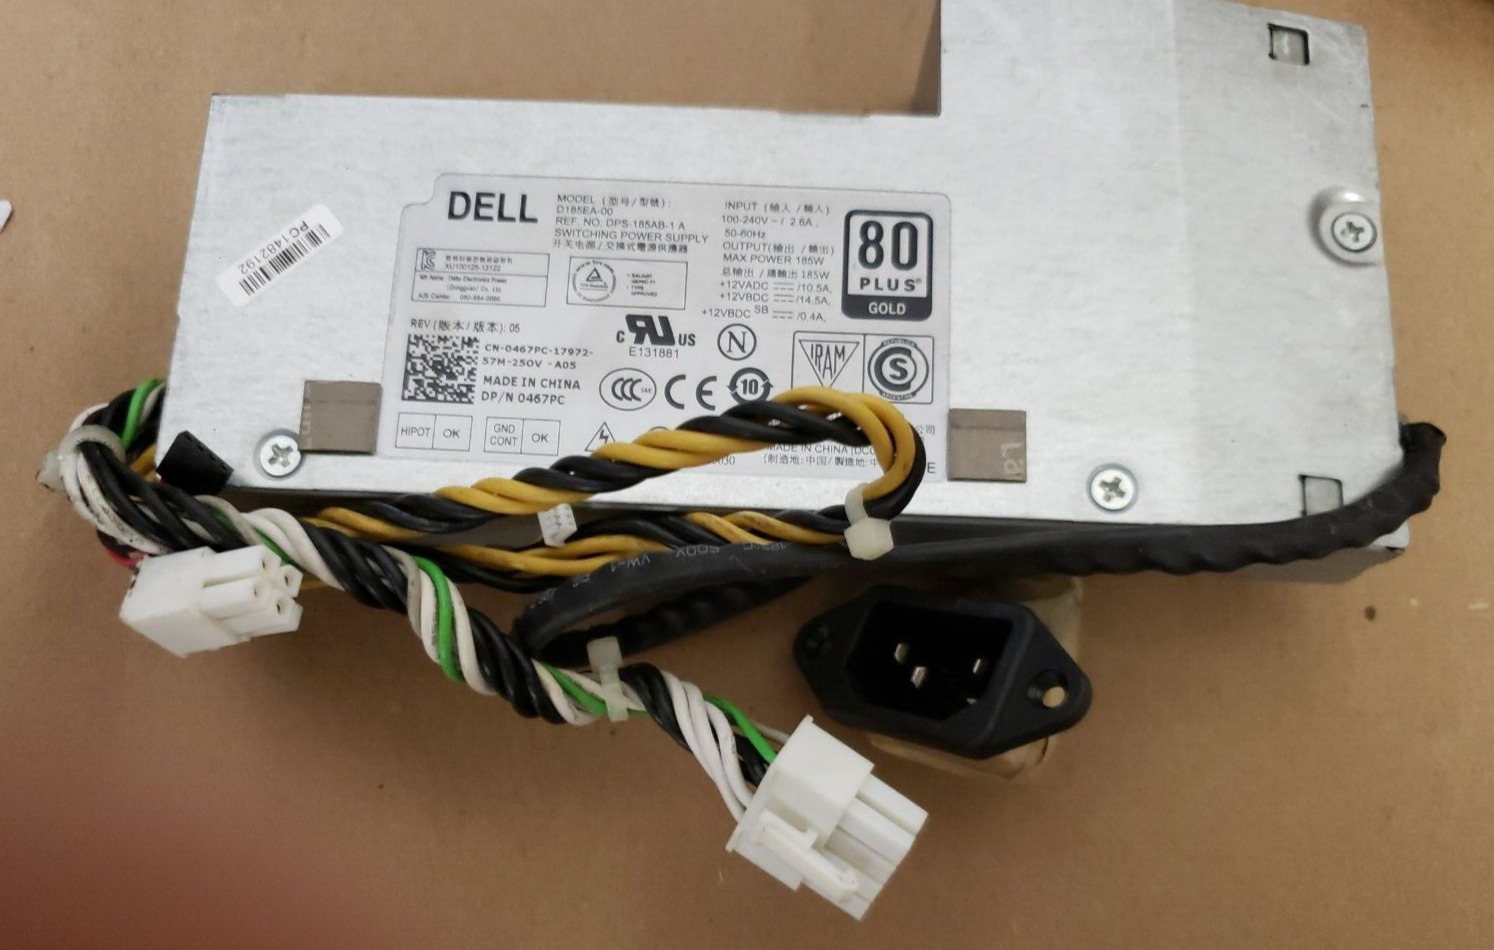 👍Dell 467PC Optiplex 9030 All In One 185W PSU Power Supply TESTED GOOD